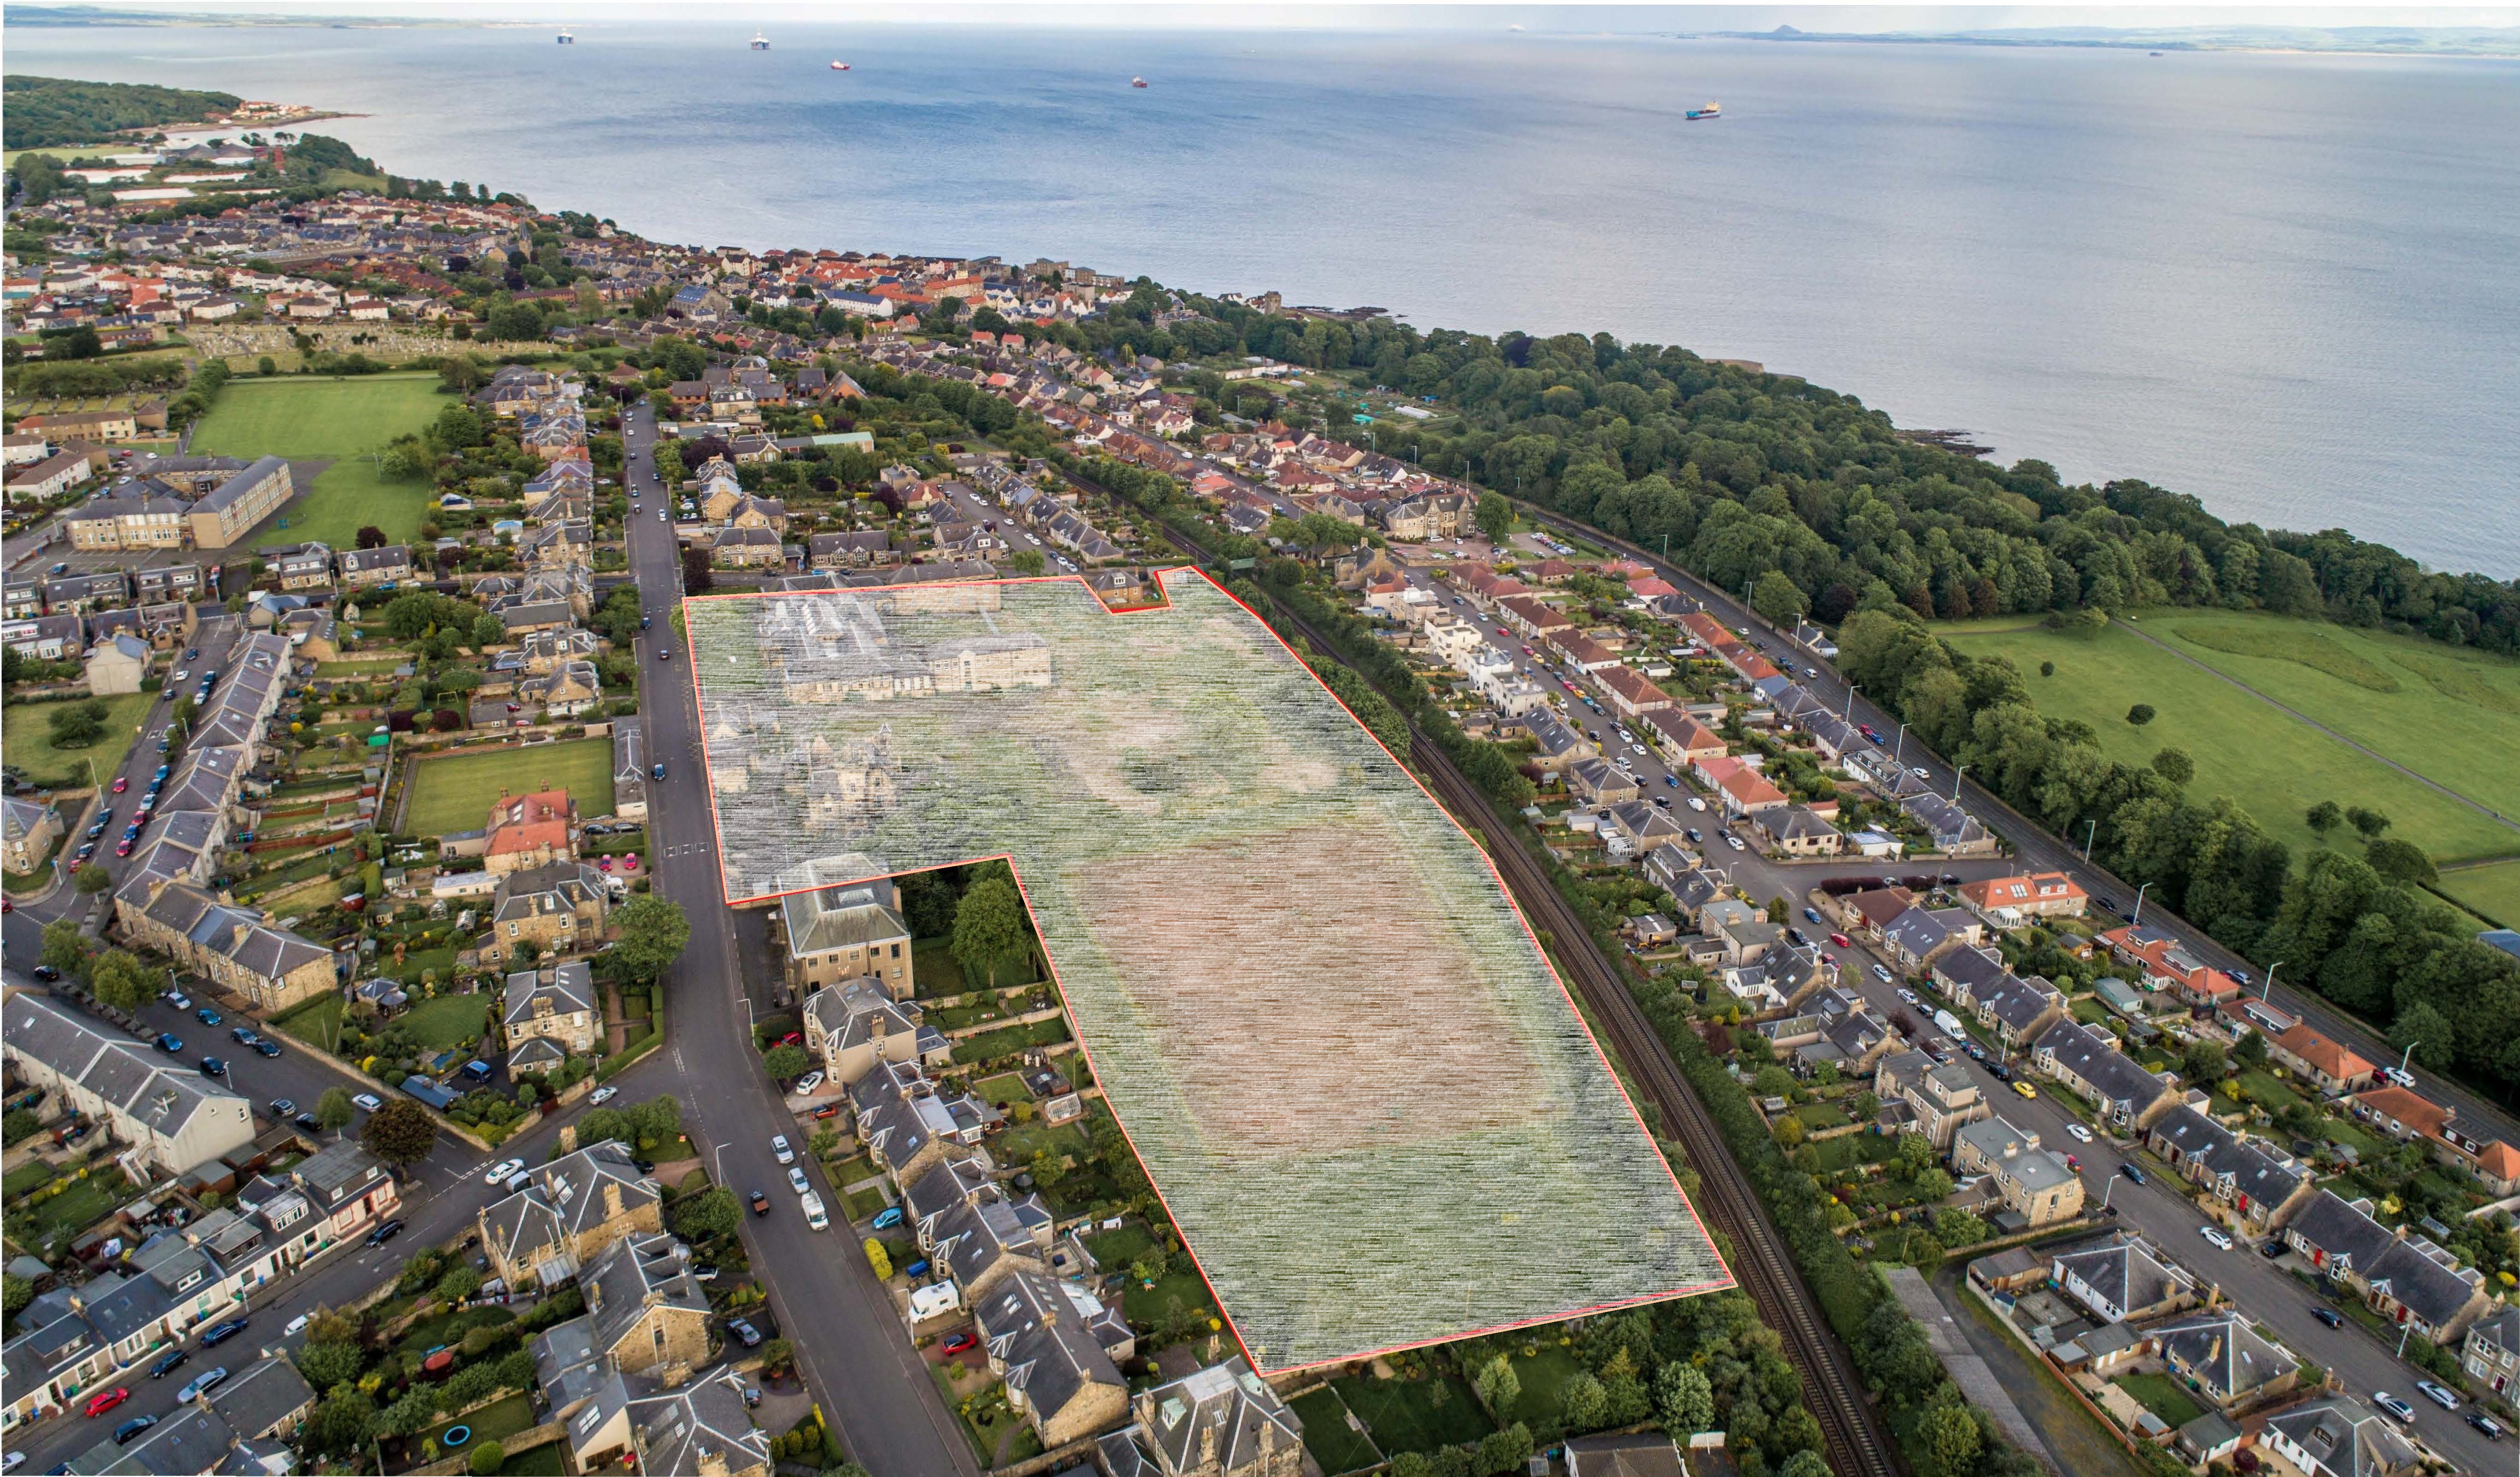 Consultation planned ahead of new Kirkcaldy homes application